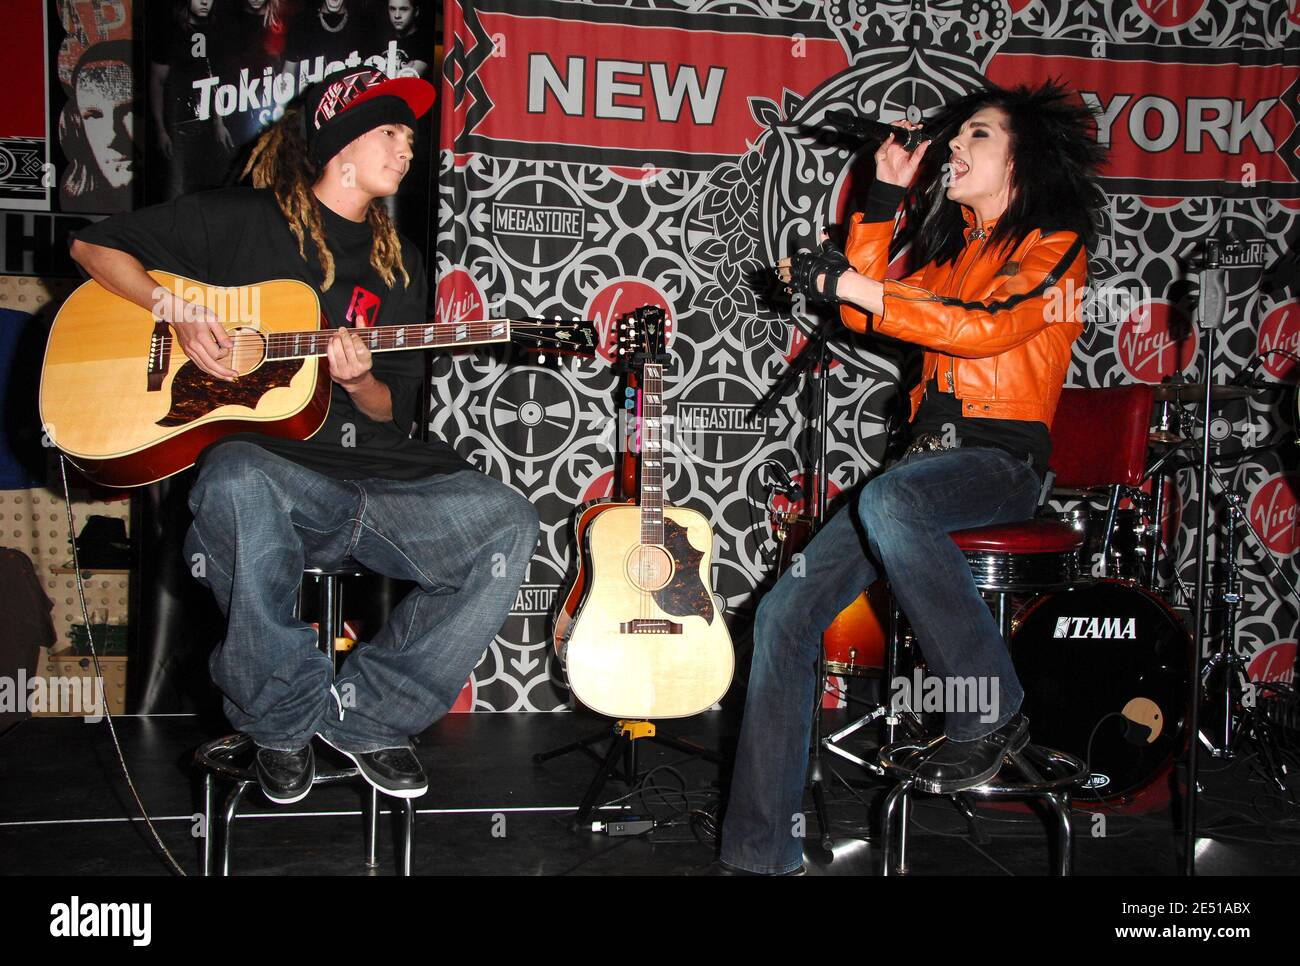 Musicians Tom Kaultiz (L) and Bill Kaultiz of Tokio Hotel perform at Virgin Megastore at Times Square in New York City, NY, USA on May 6, 2008. Photo by Gregorio Binuya/ABACAPRESS.COM Stock Photo